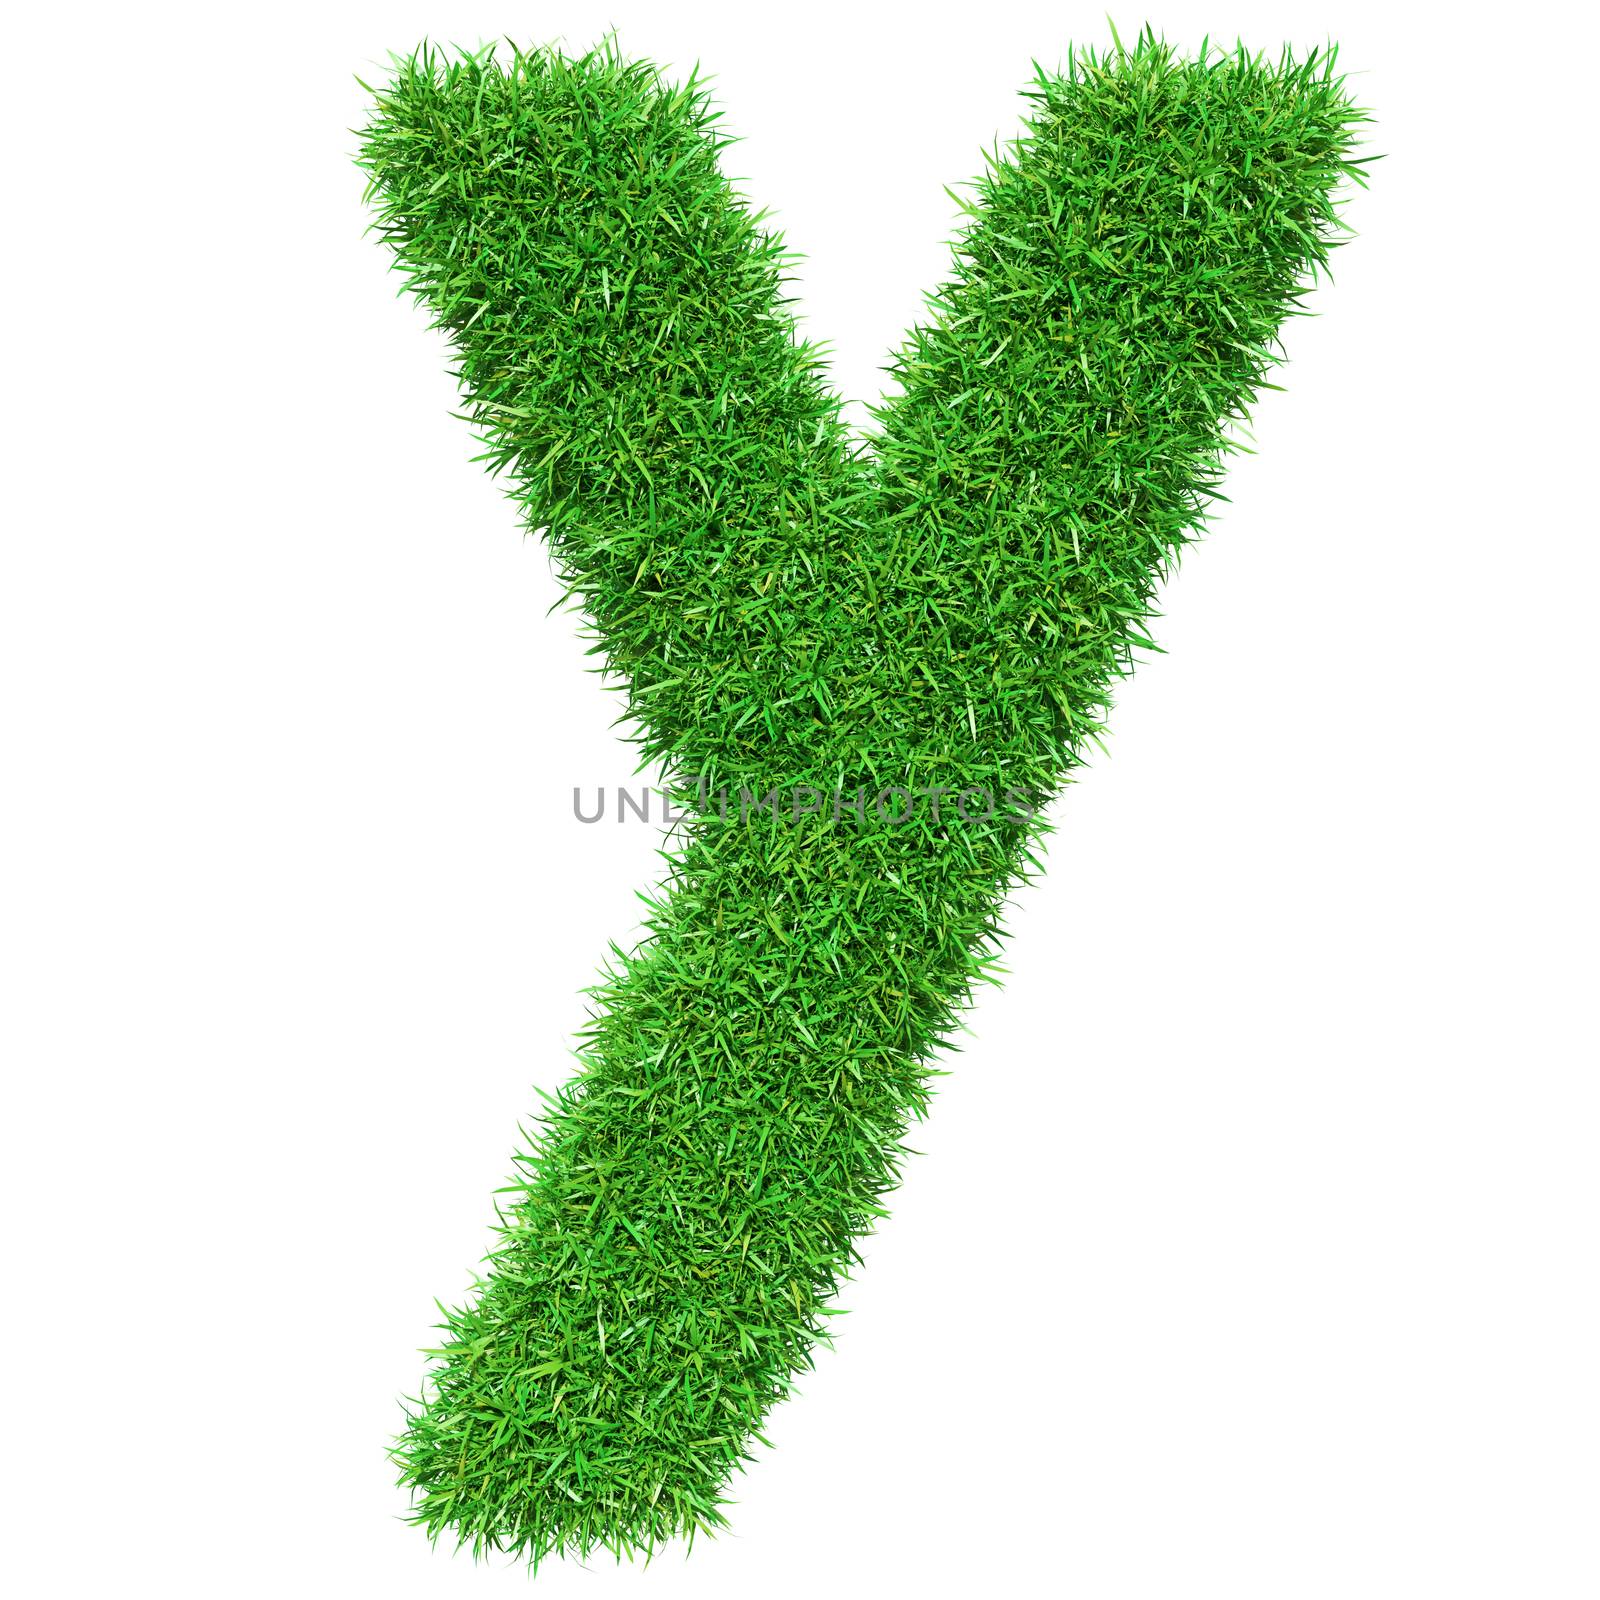 Green Grass Letter Y by cherezoff